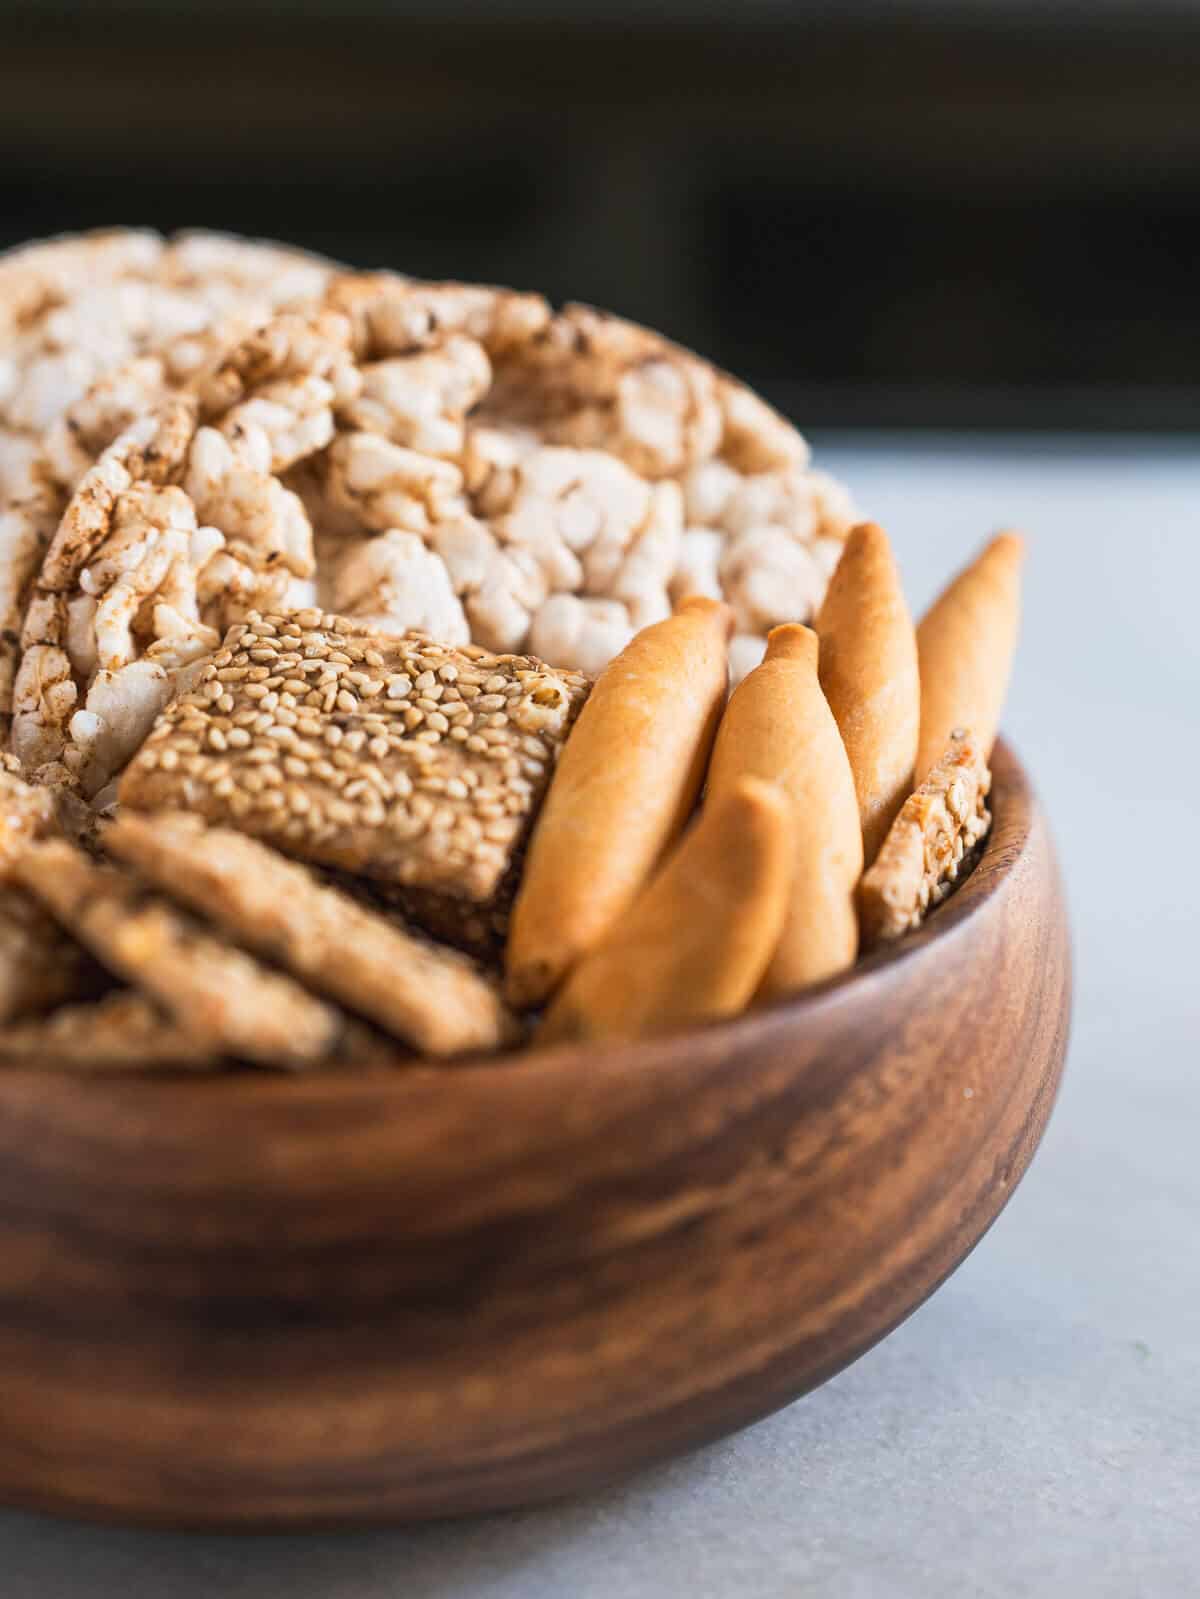 rice cakes and whole bran crackers.